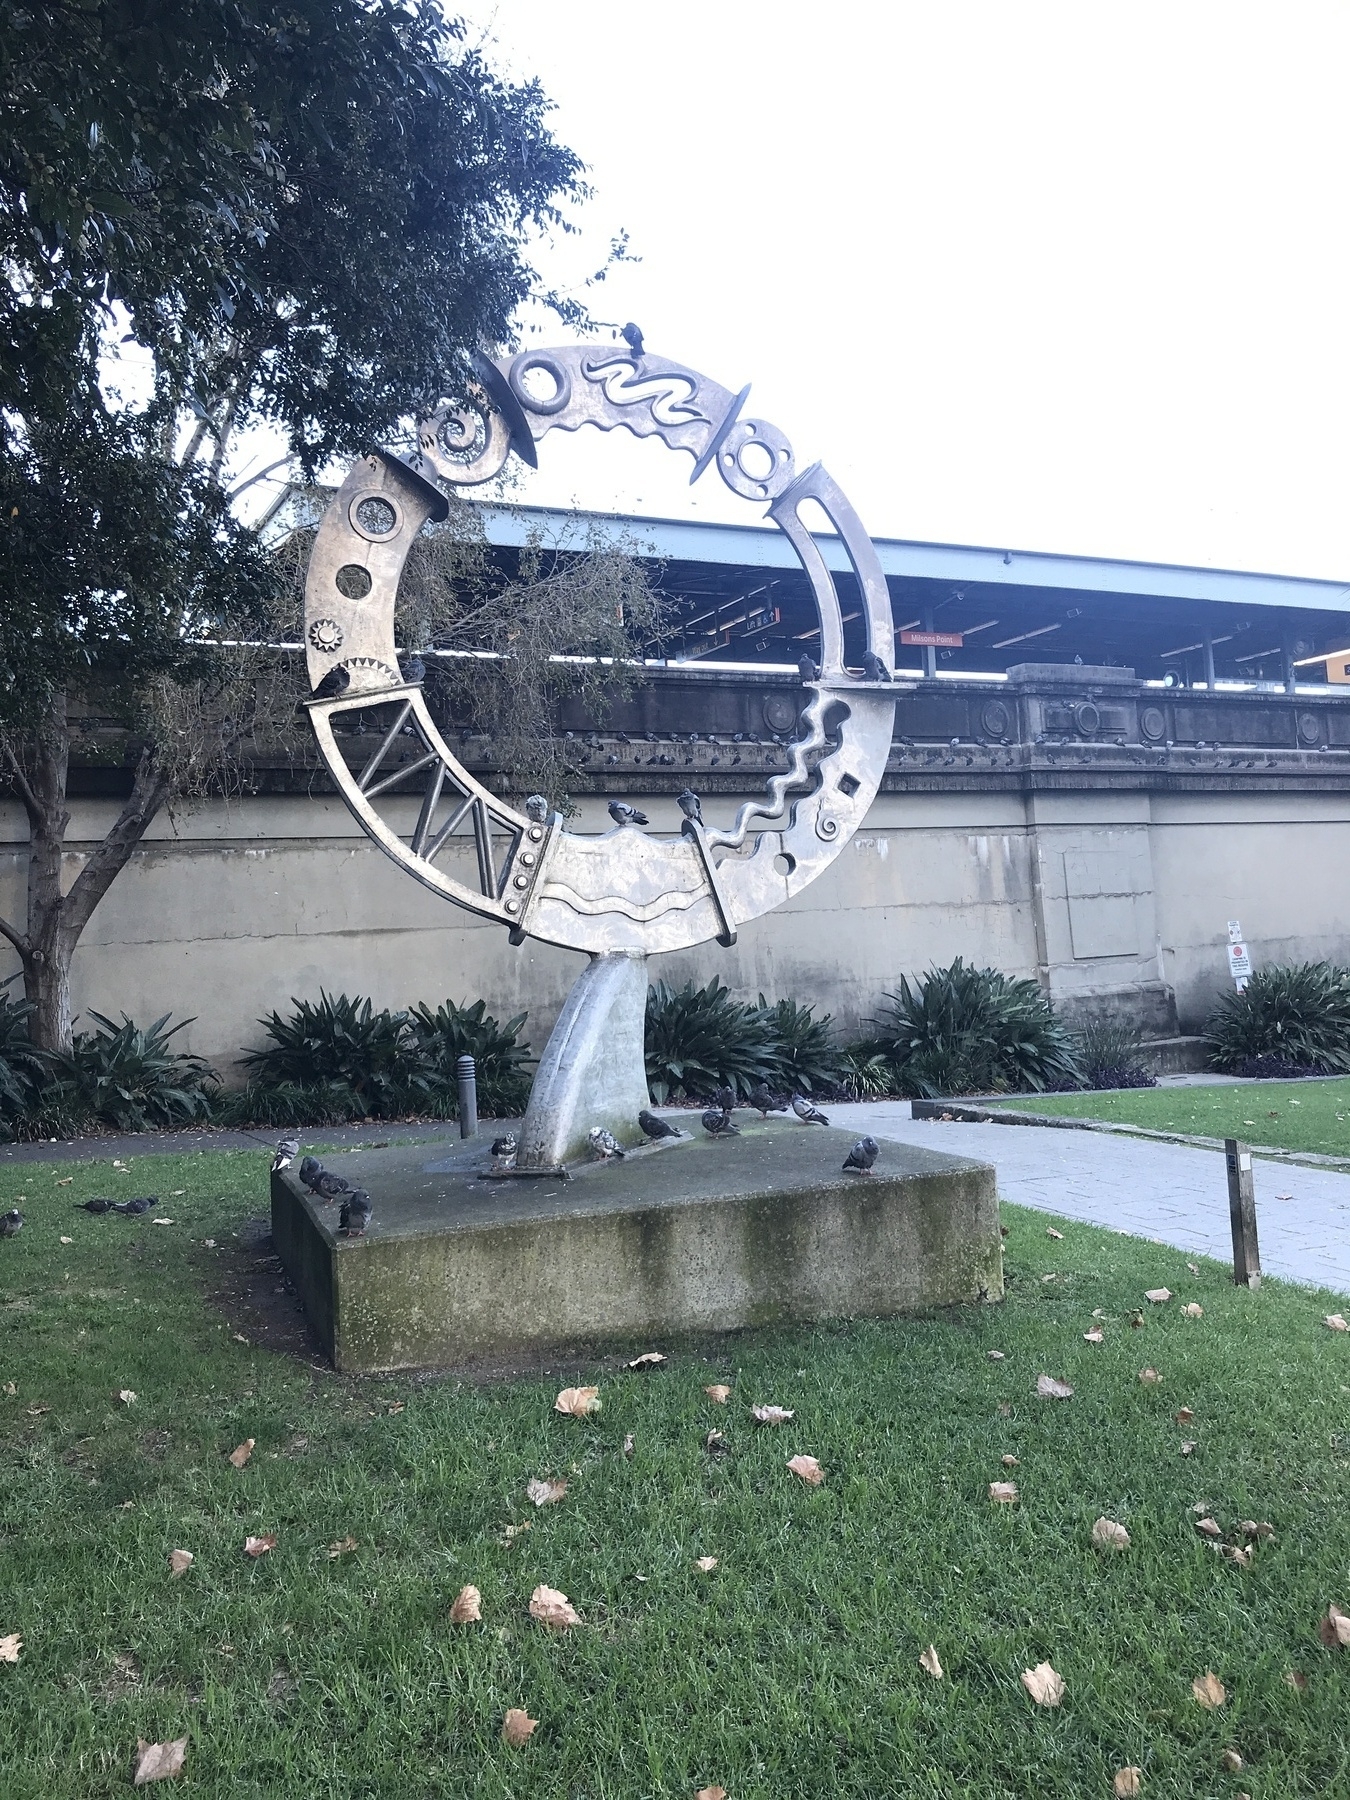 A circular metal sculpture in the shape of a ring, made from individual sections welded together, with a flat plate at each join. The sections have cutouts in swirly shapes, cogwheel shapes, spirals and ellipses, and one contains steel bars set in a zigzag pattern like a bridge. The main structure stands on a steel wedge shaped like a shark fin, which in turn is bolted to a concrete plinth. The sculpture stands on grass beside a path, with a wall and train station behind it. A pigeon sits on the very top of the ring. Three pigeons sit at the bottom, inside the ring, and others on two of the metal plates that lie horizontally. A dozen pigeons sit on the concrete plinth, and two on the grass. The sky is white - washed out.